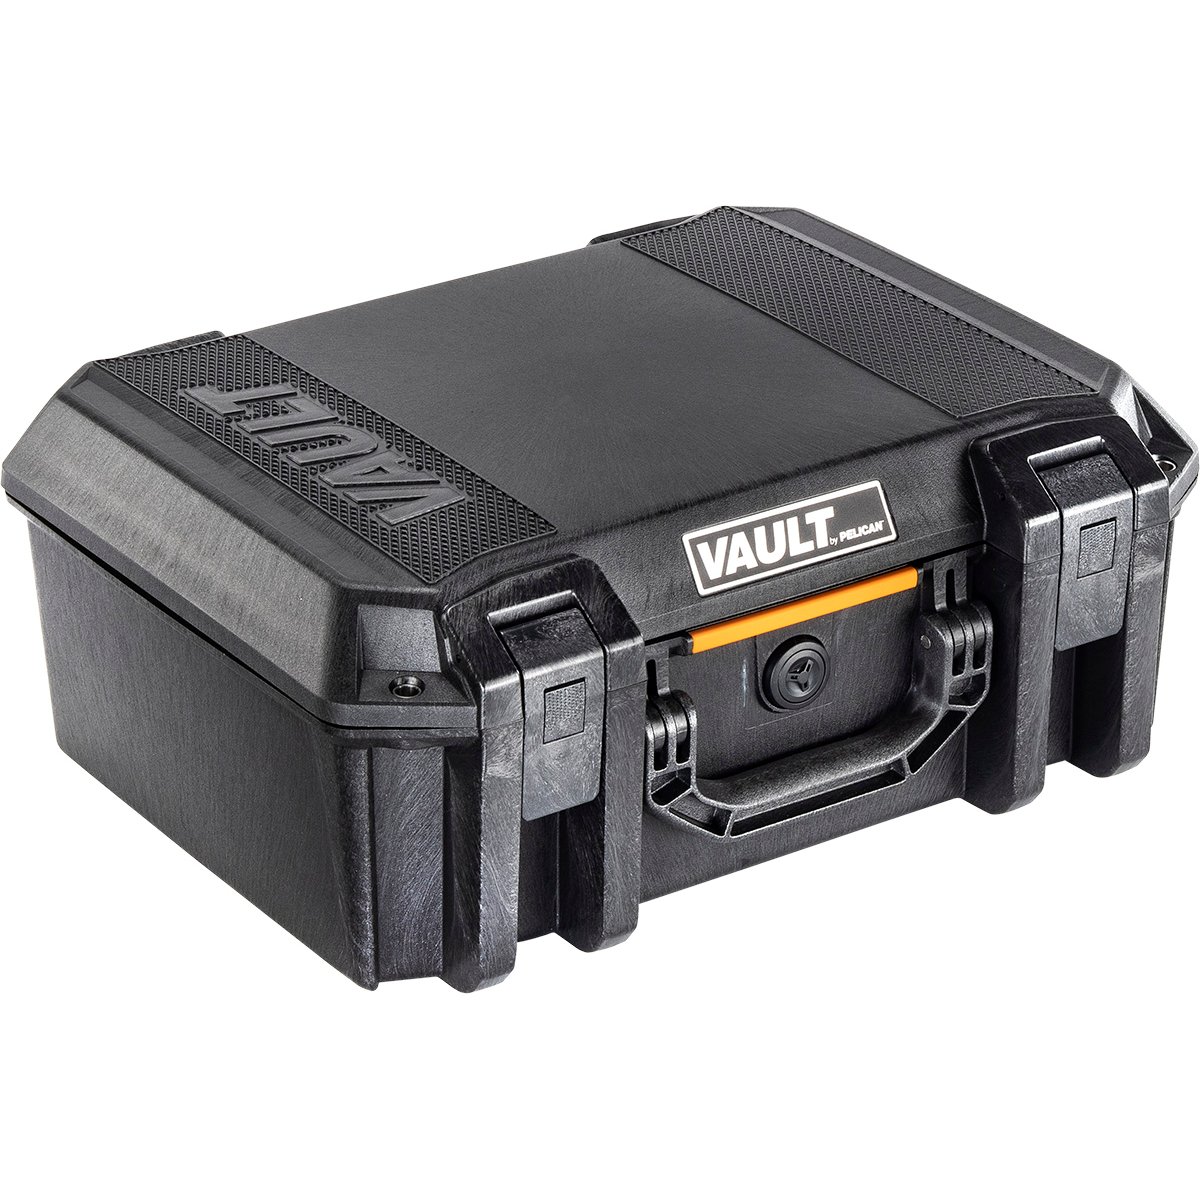 V300 Vault Equipment Case With Padded Dividers